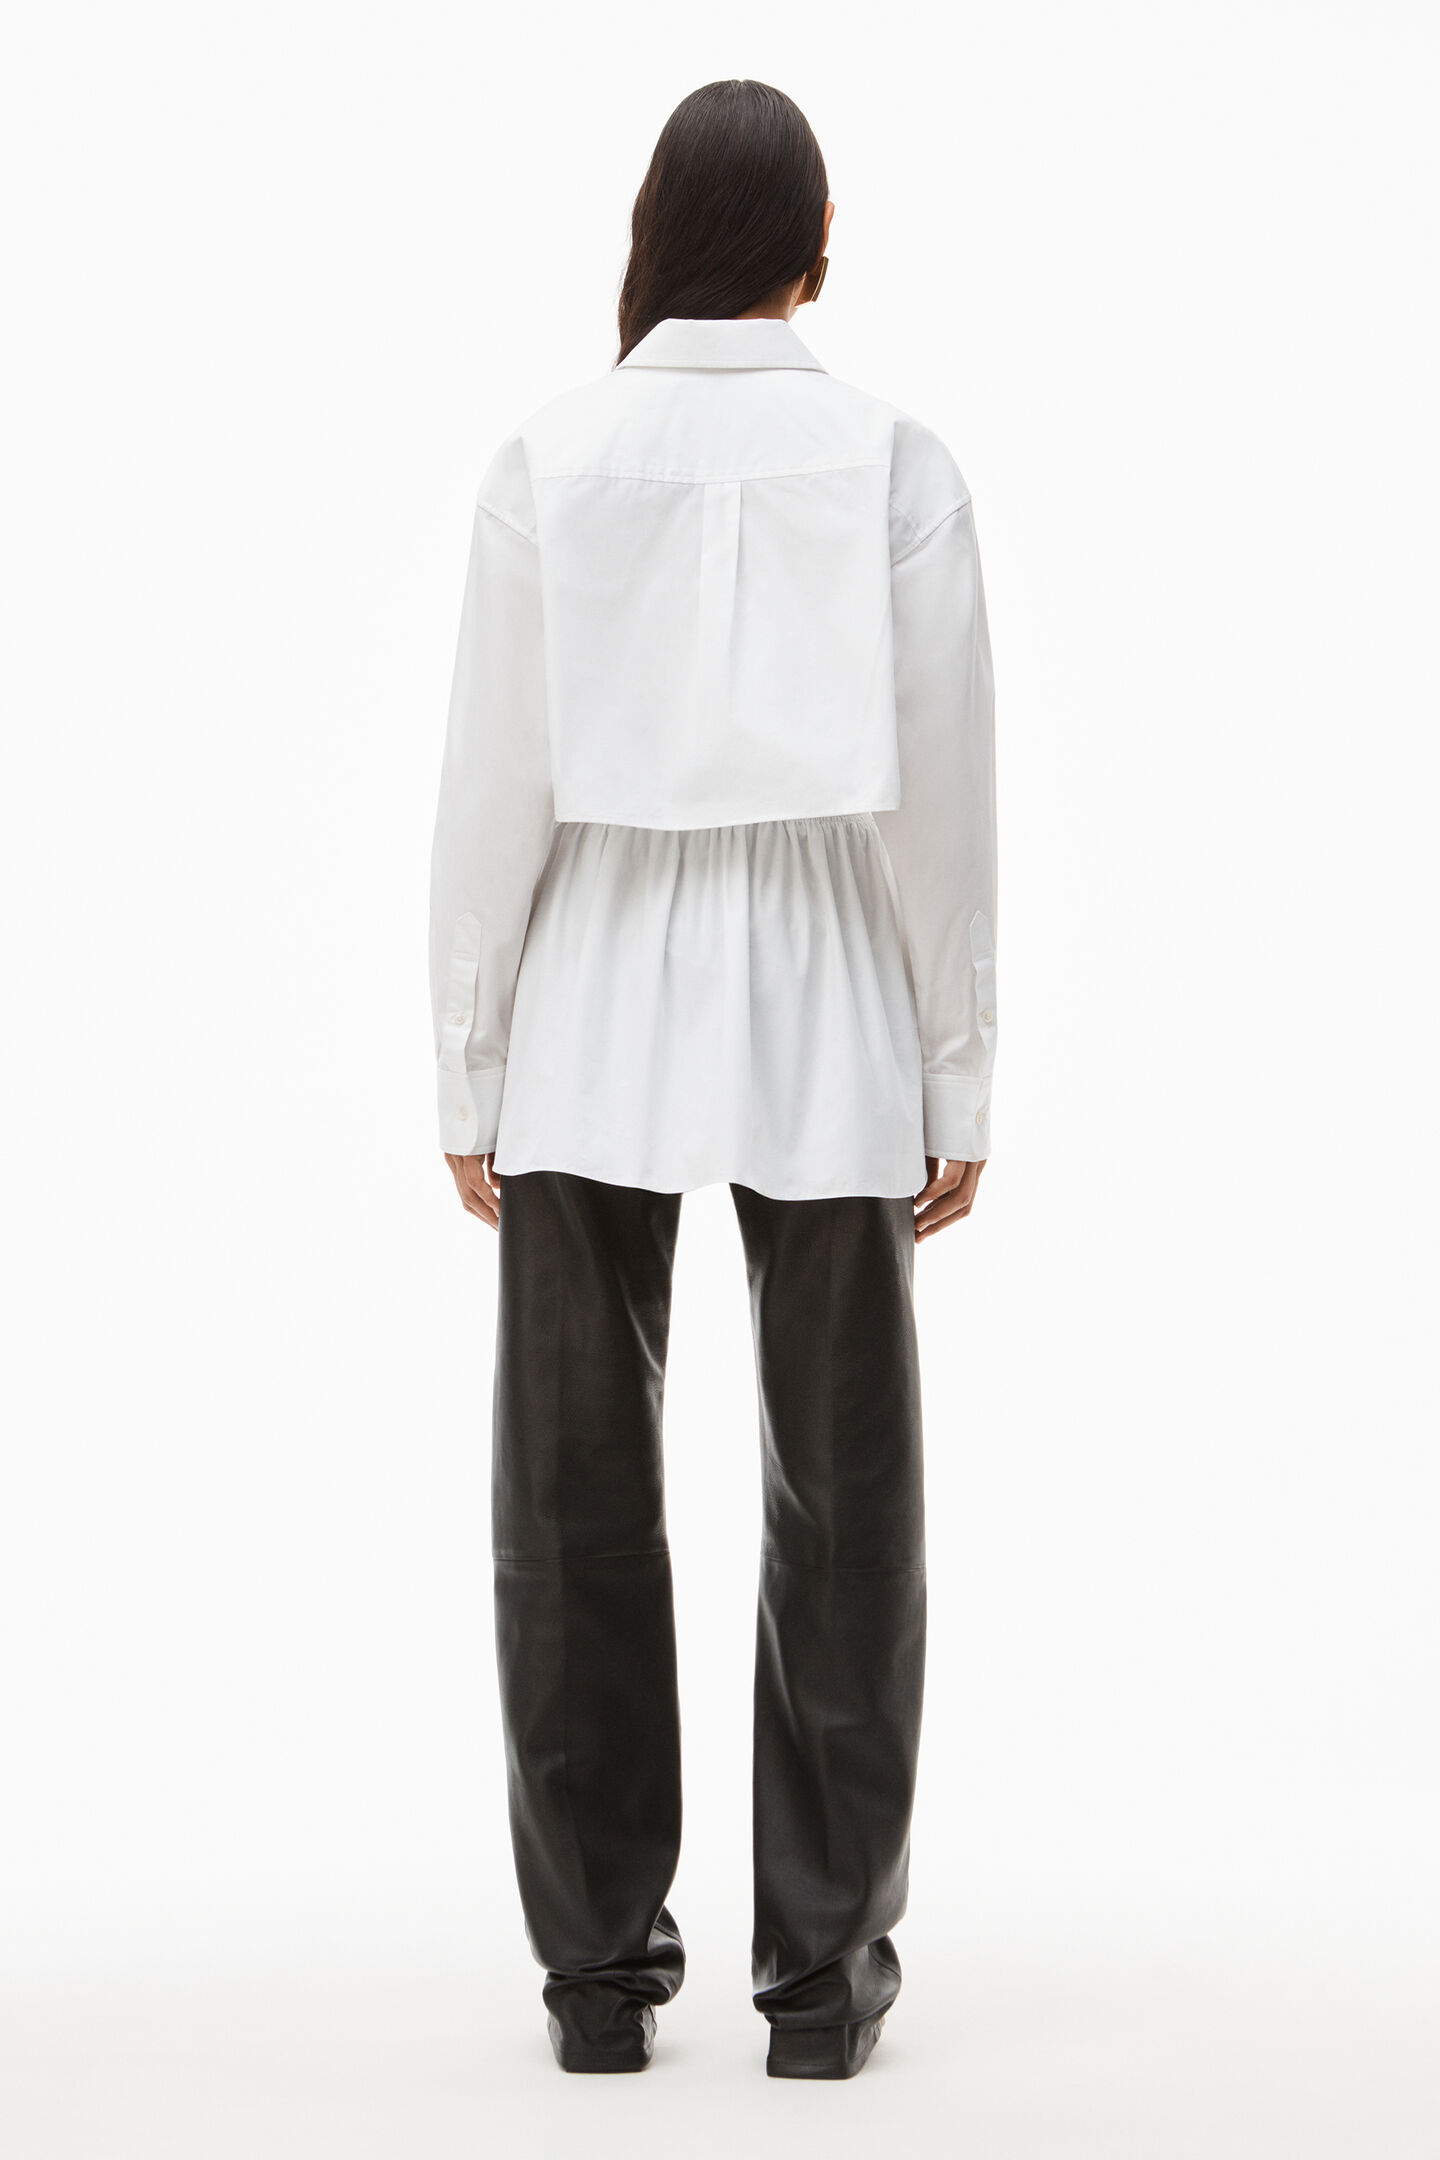 alexanderwang SMOCKED CAMI IN COMPACT COTTON WHITE